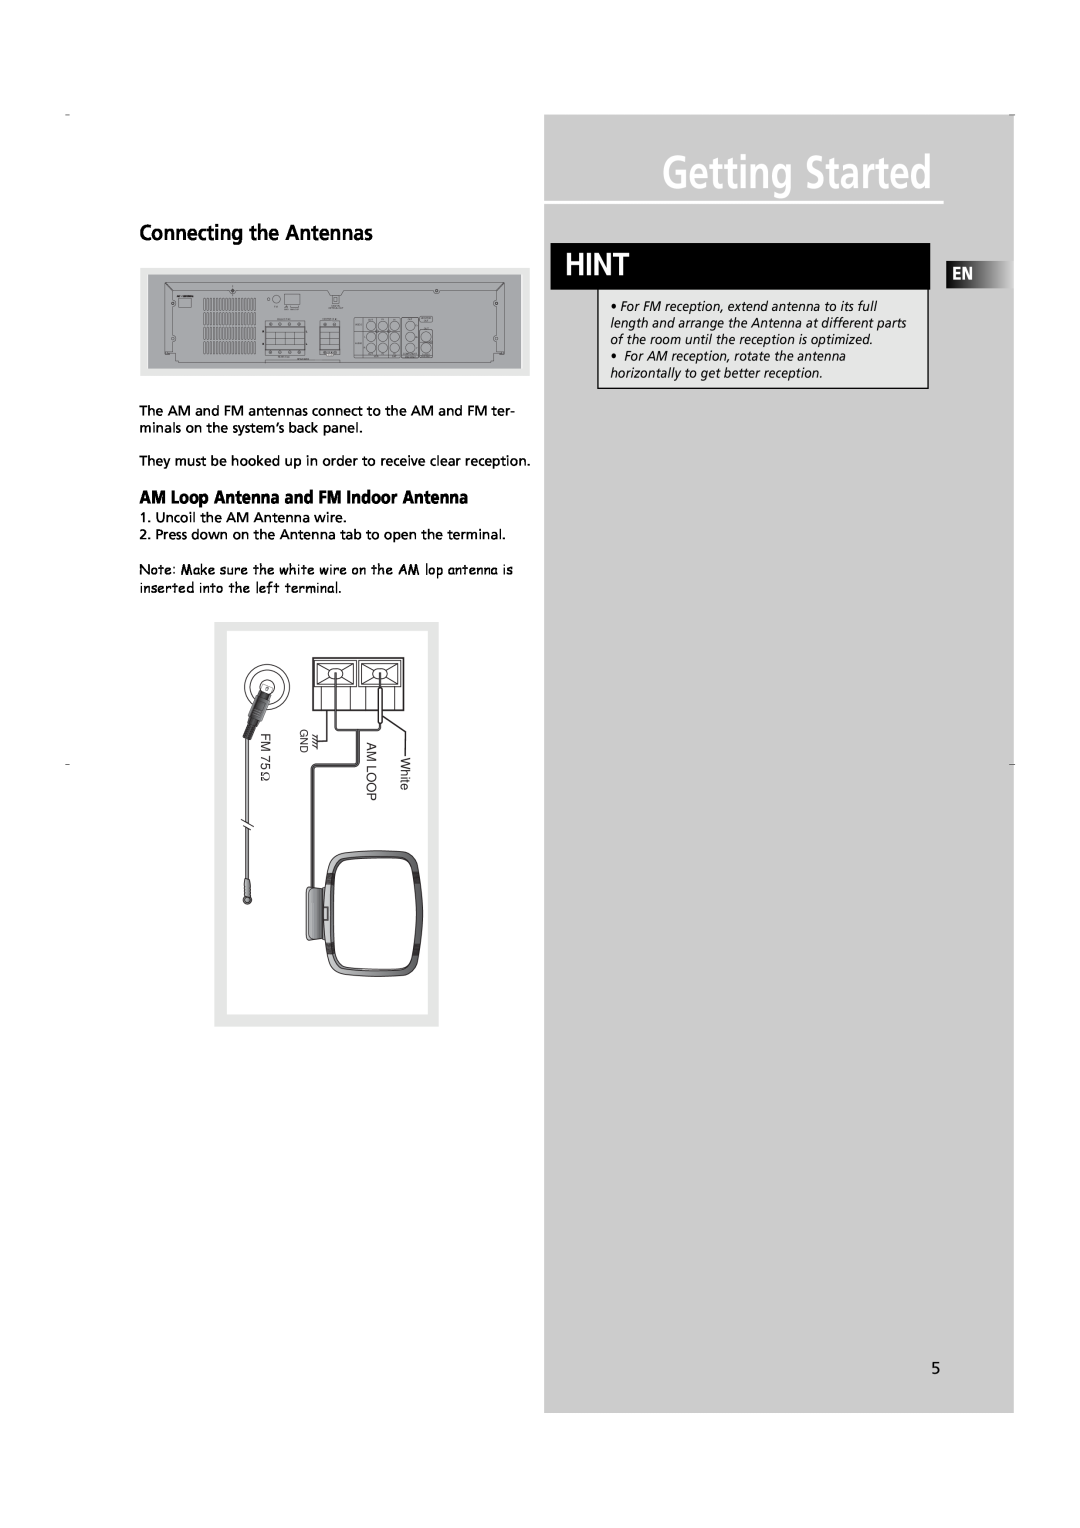 RCA RTD250 user manual Hinten, Getting Started, Connecting the Antennas, AM Loop Antenna and FM Indoor Antenna 